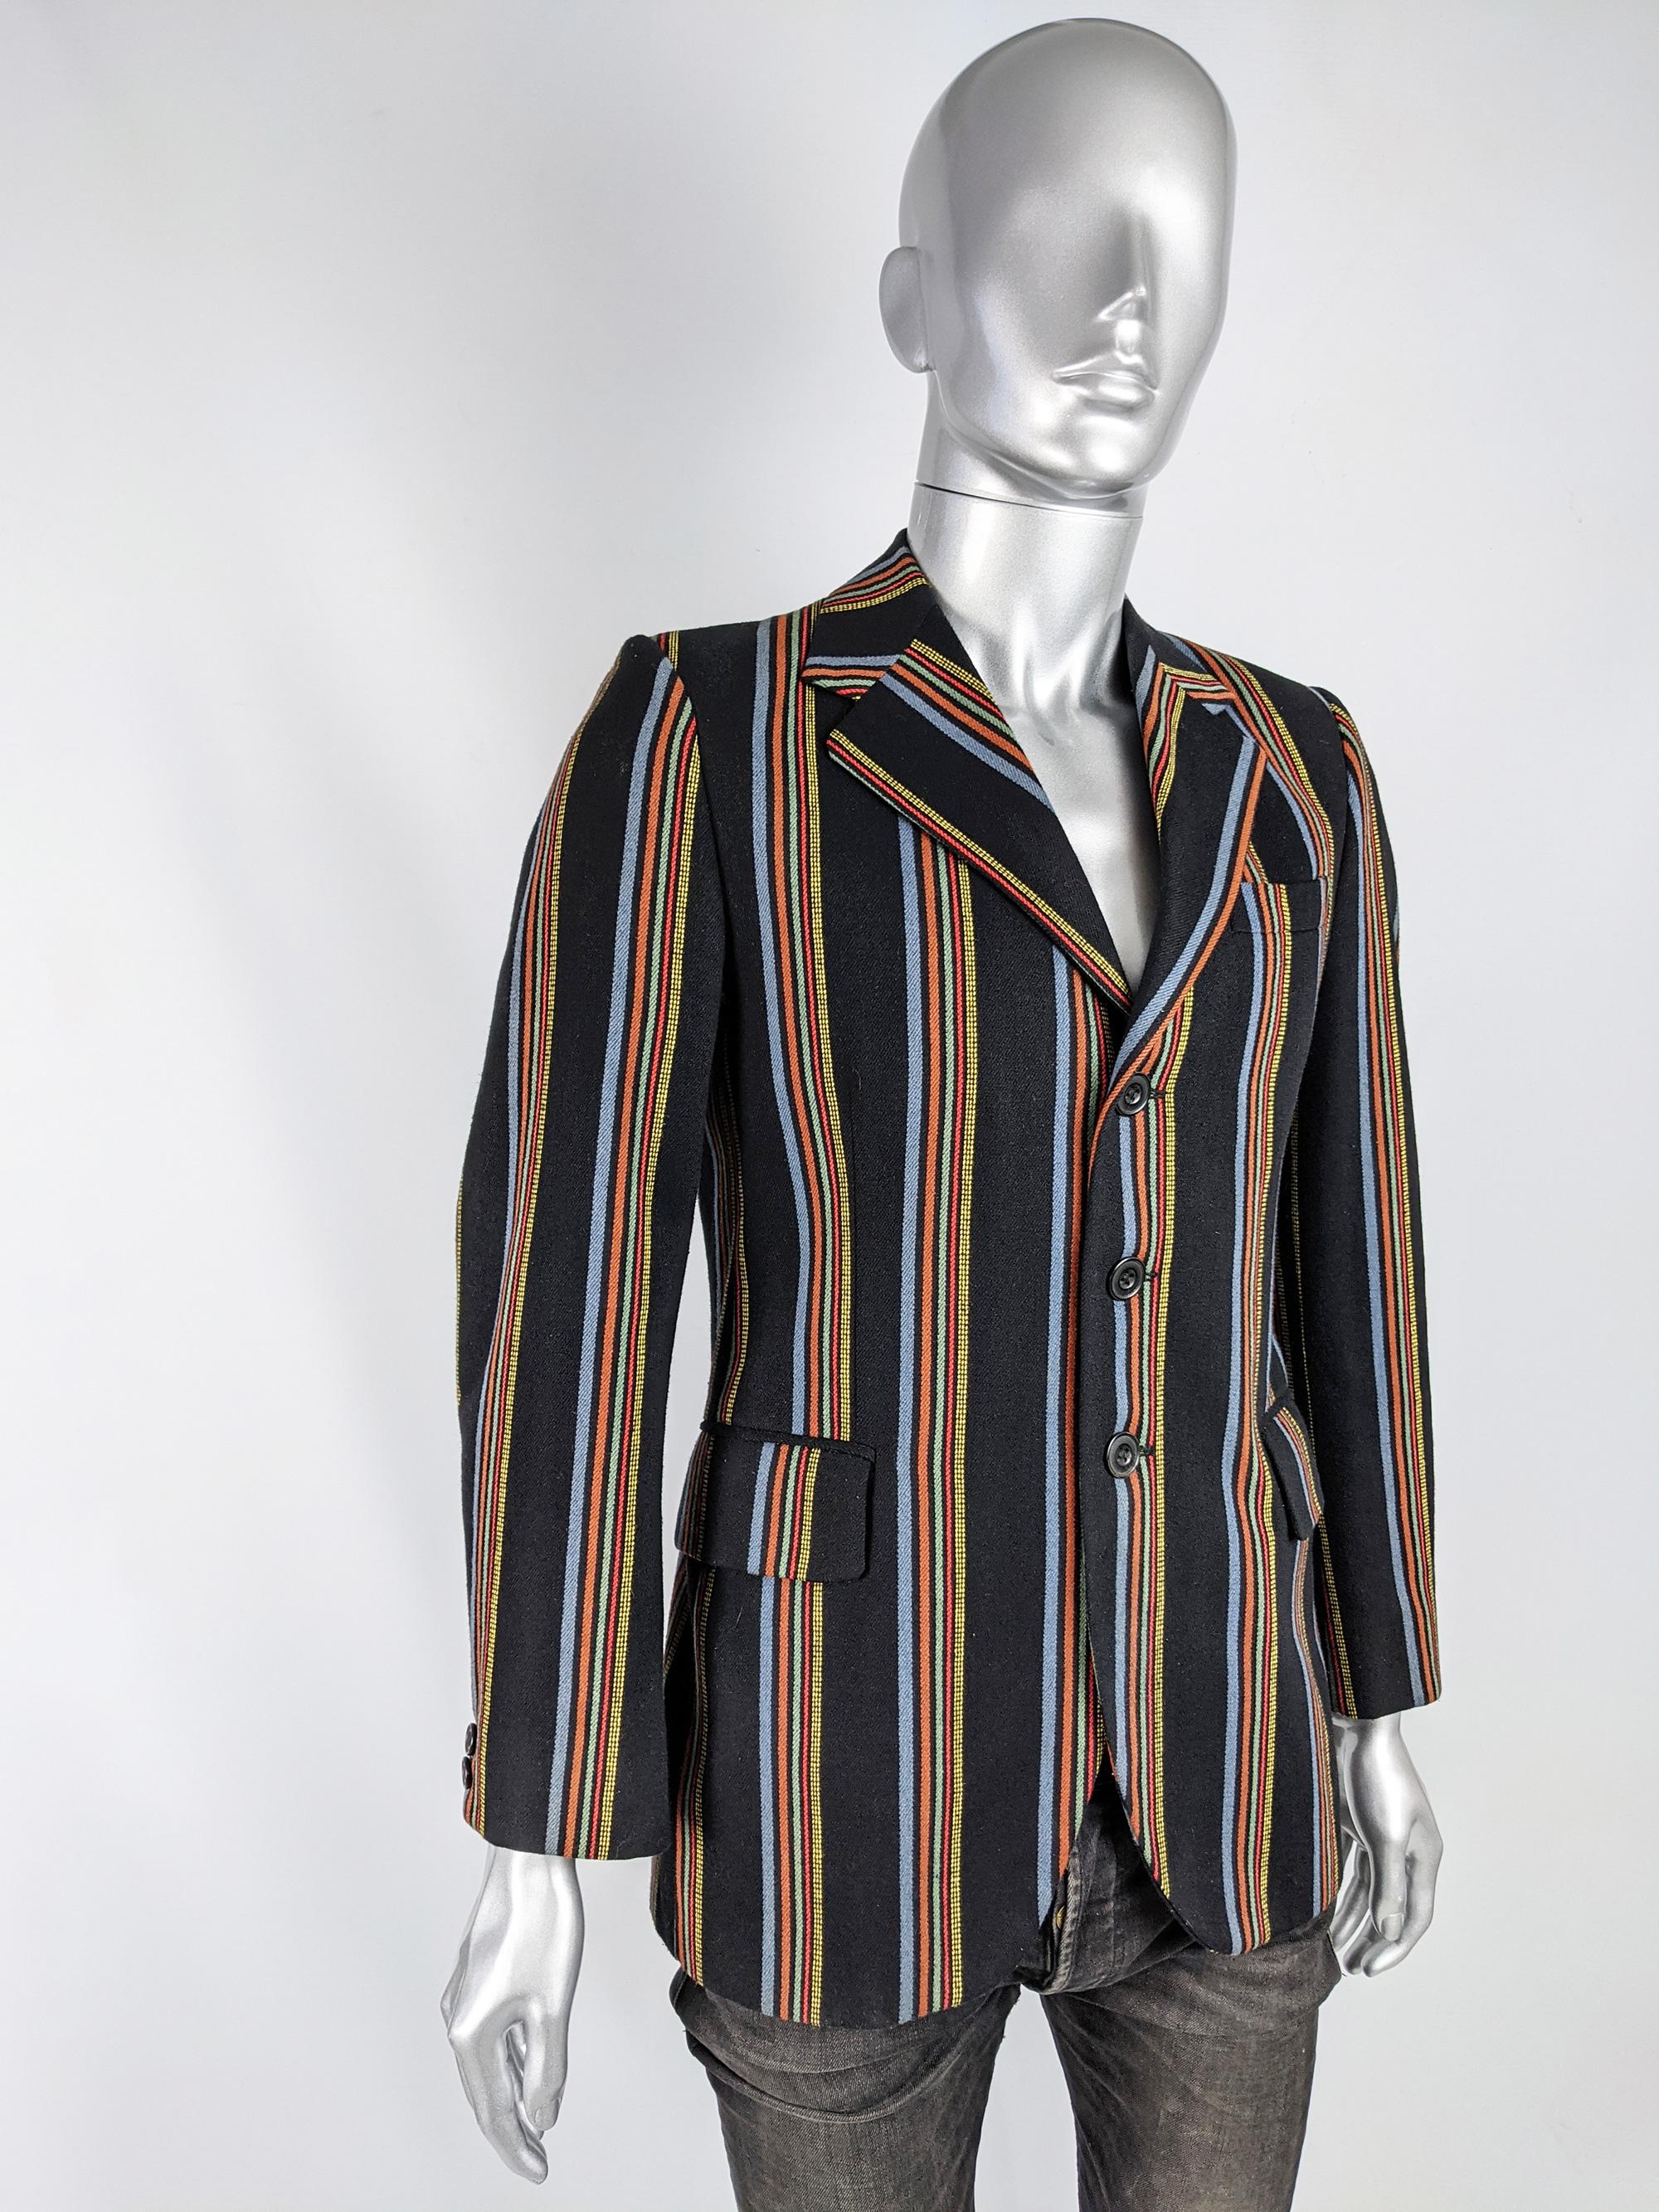 1970s Mens Vintage Striped Blazer Jacket In Good Condition For Sale In Doncaster, South Yorkshire